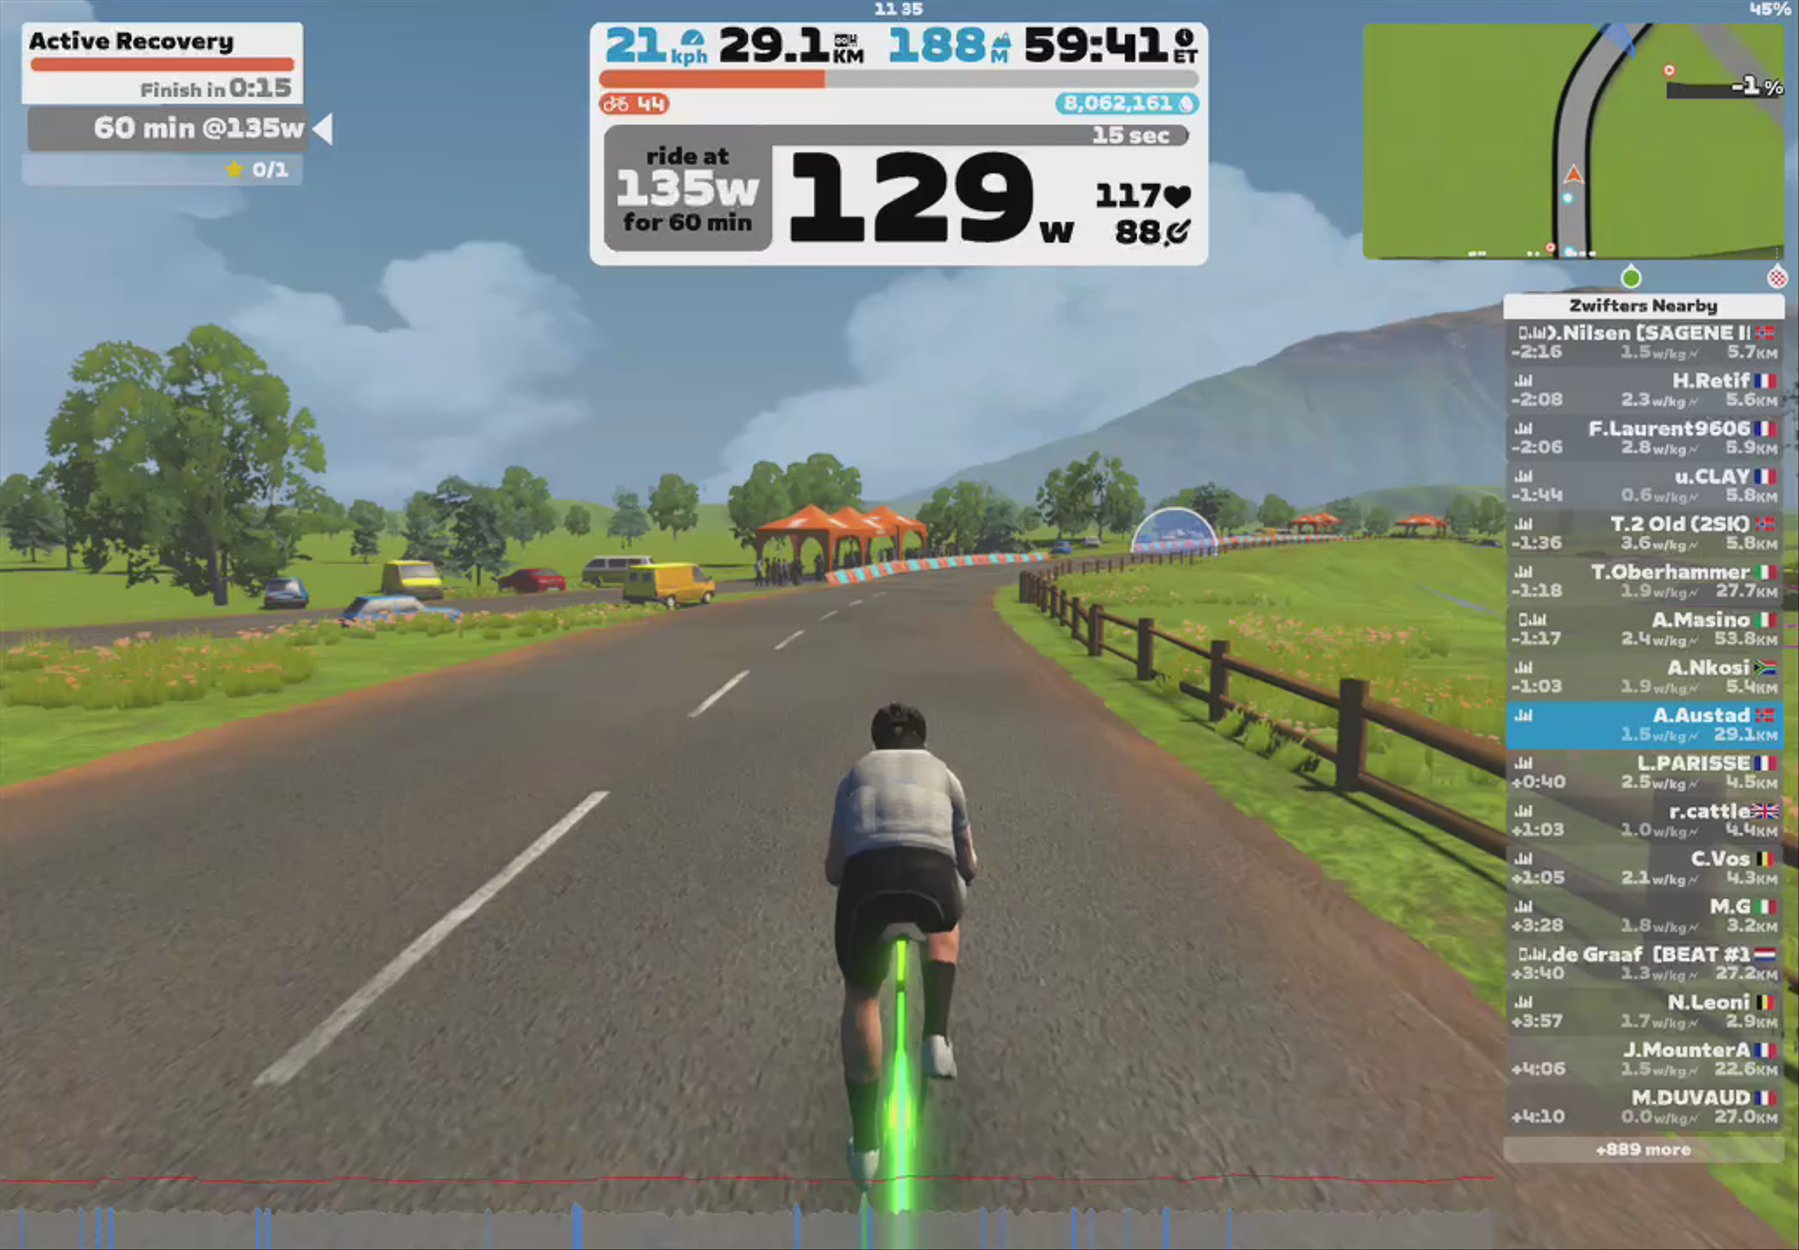 Zwift - Active Recovery in France